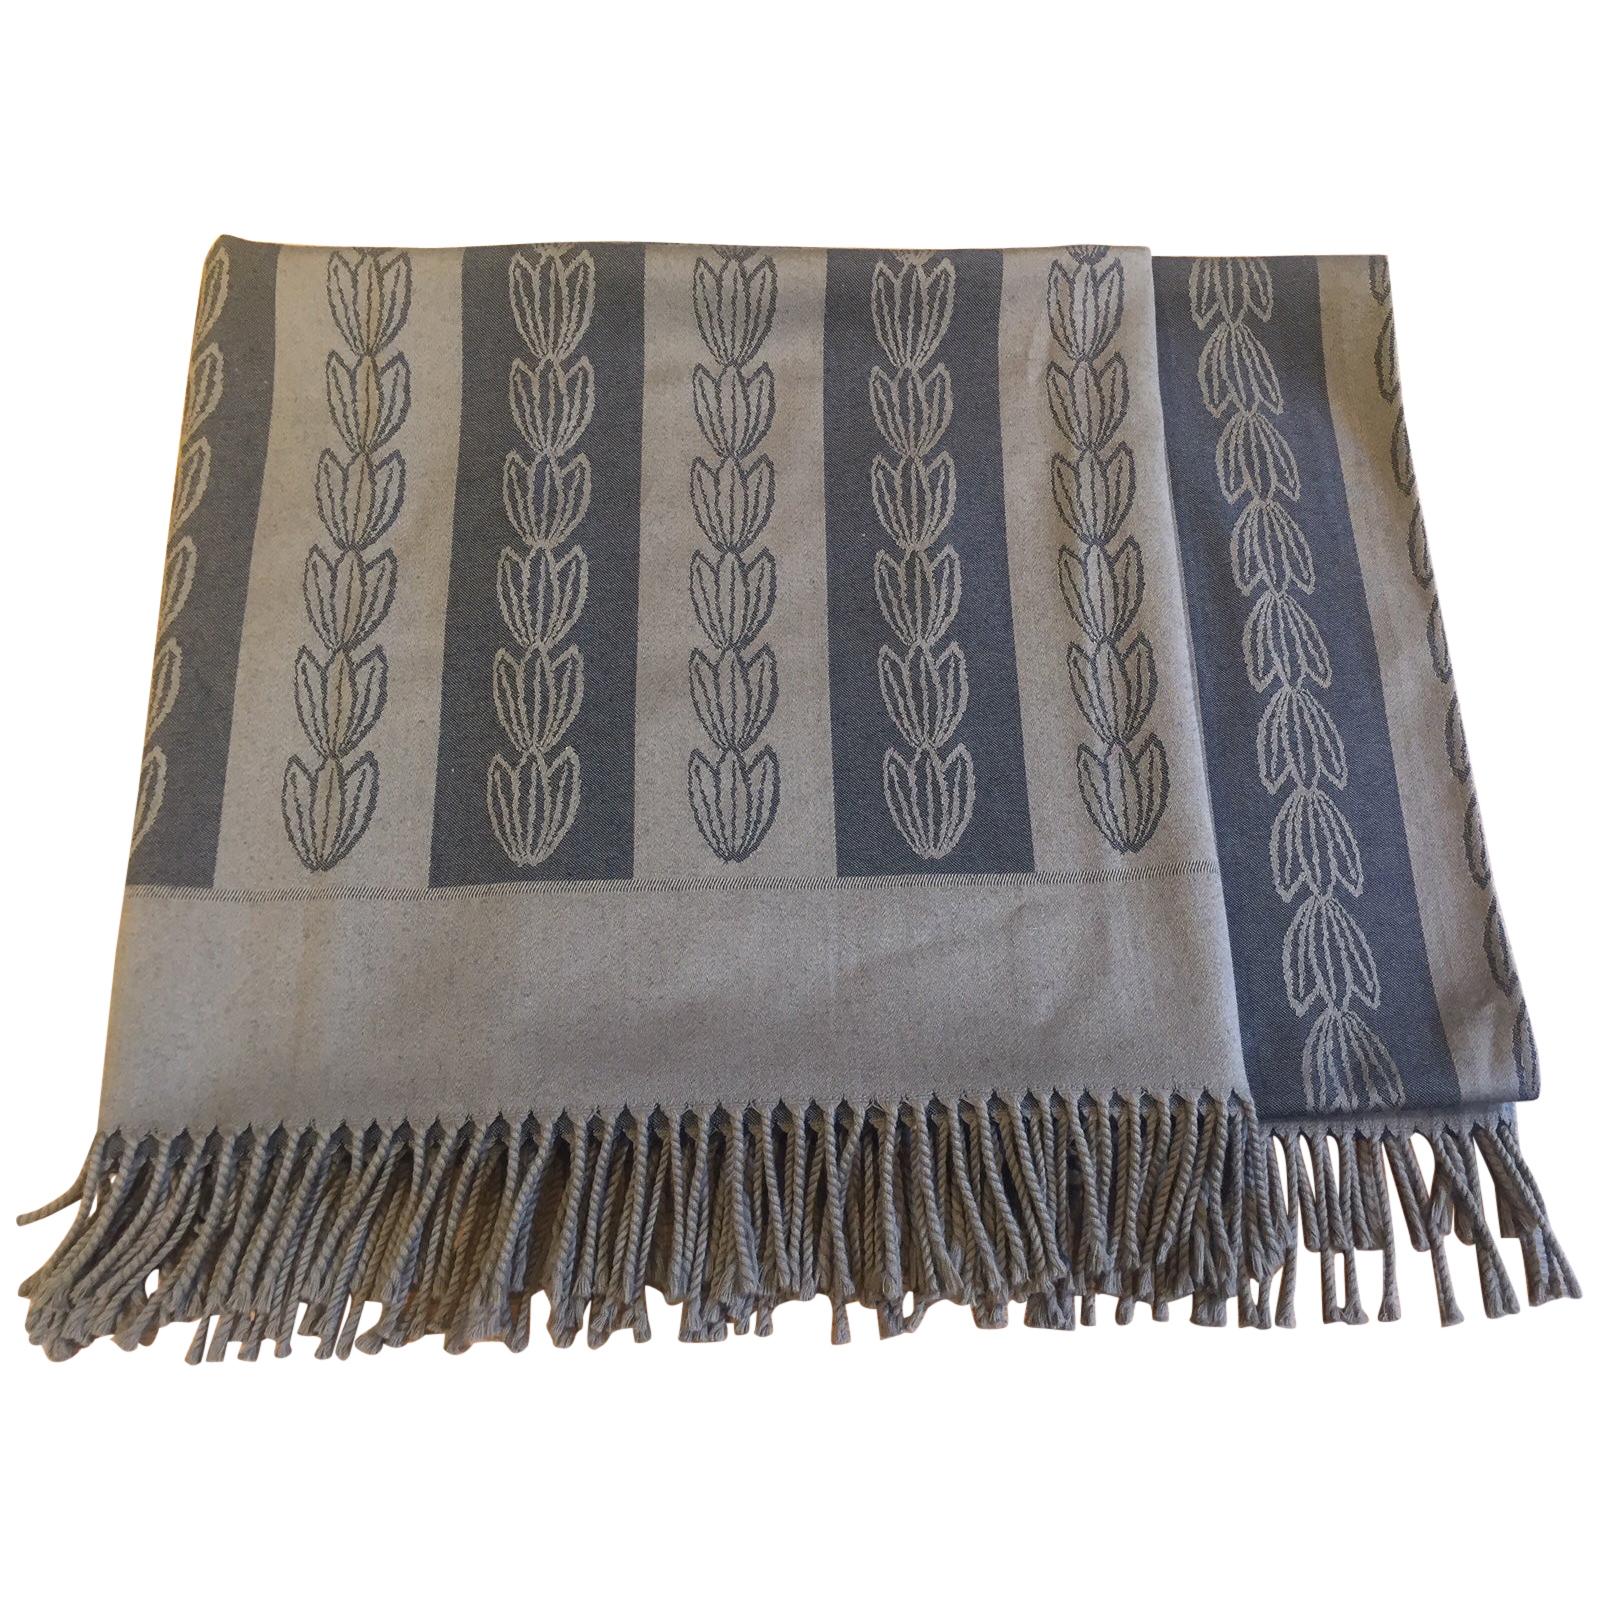 Jacques Gracia Throw by Baker Color Brown and Black Stripe Pattern